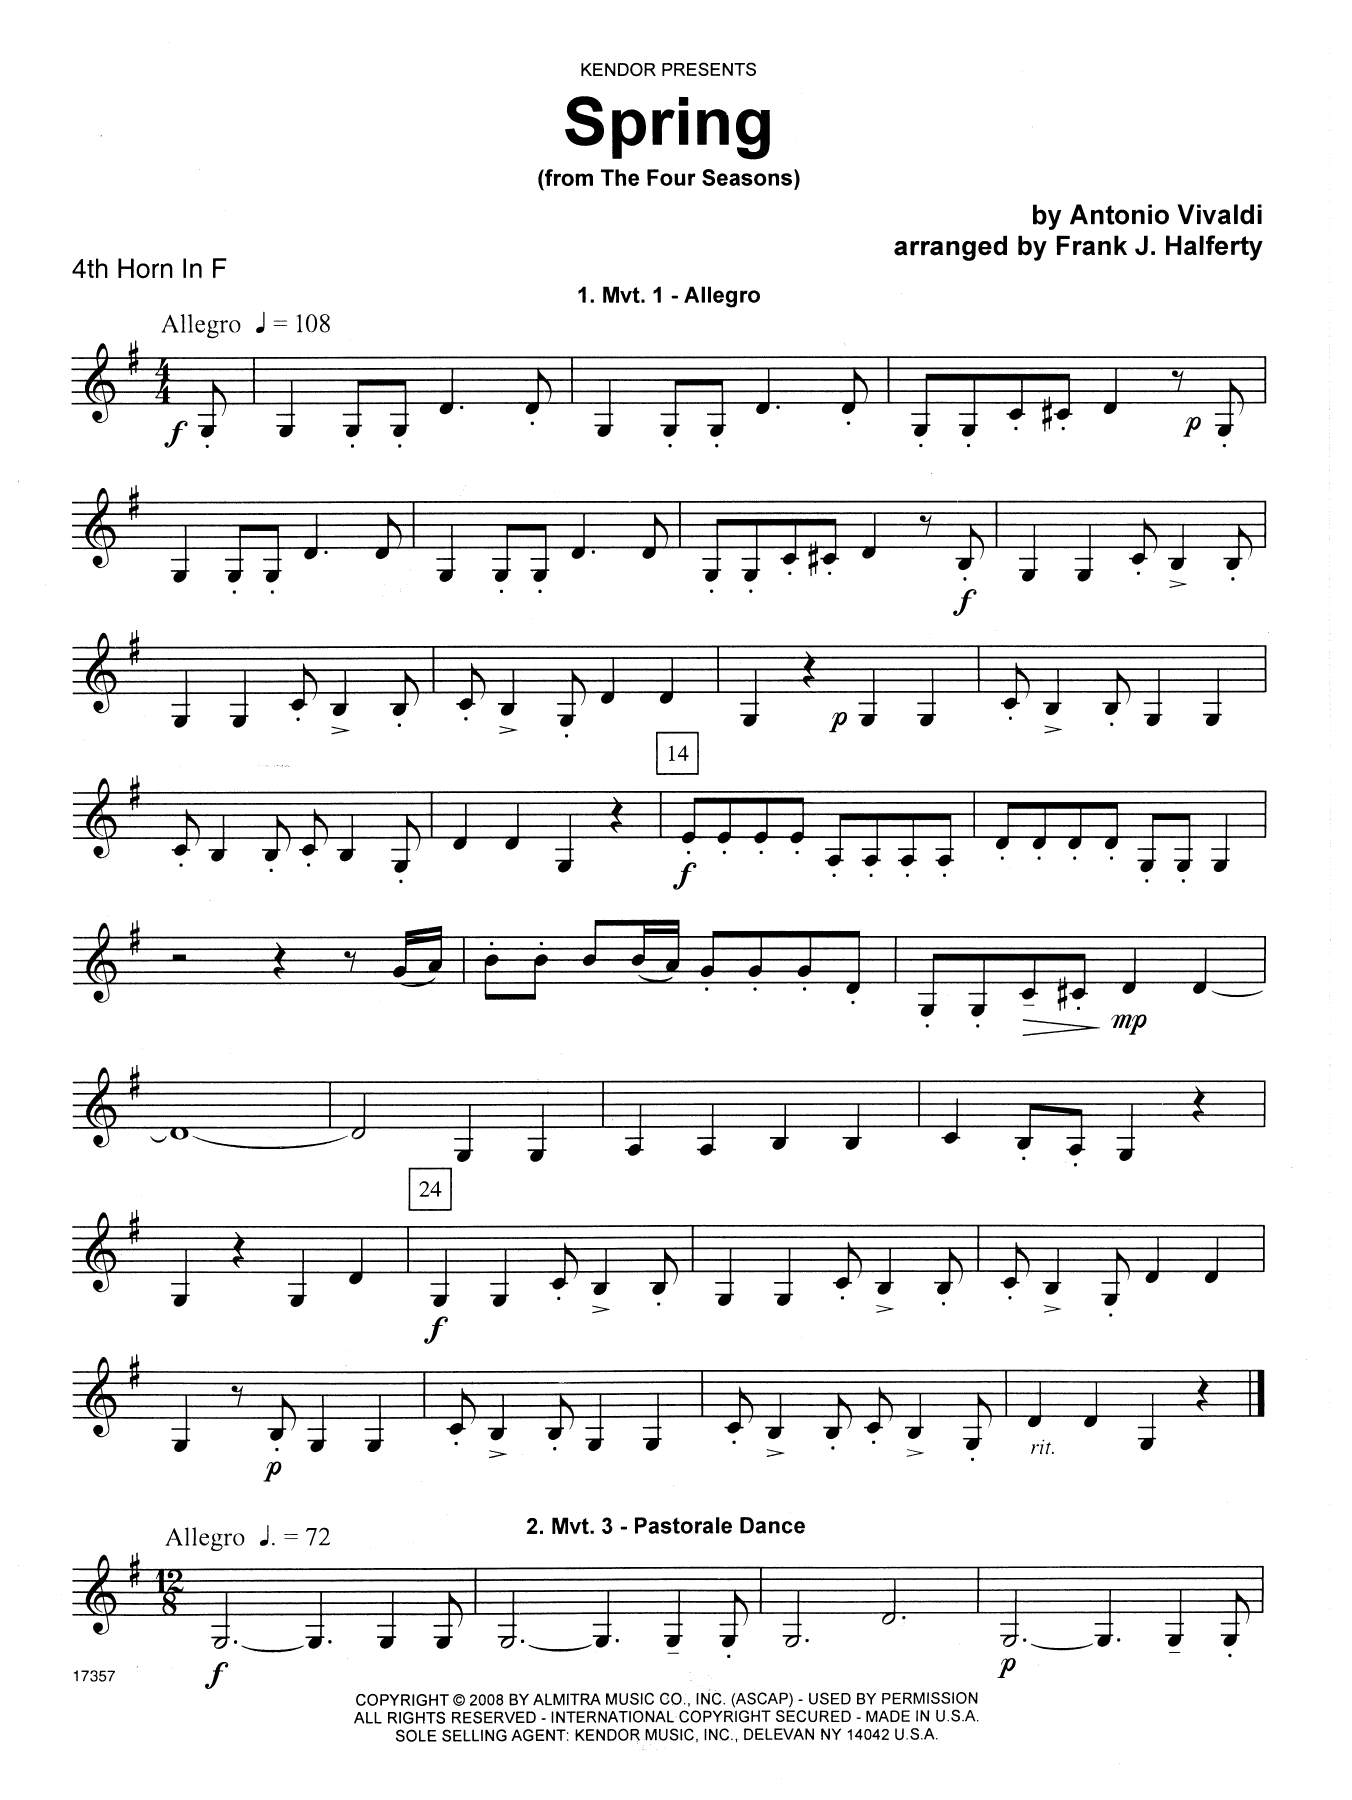 Download Frank J. Halferty Spring (from The Four Seasons) - 4th Ho Sheet Music